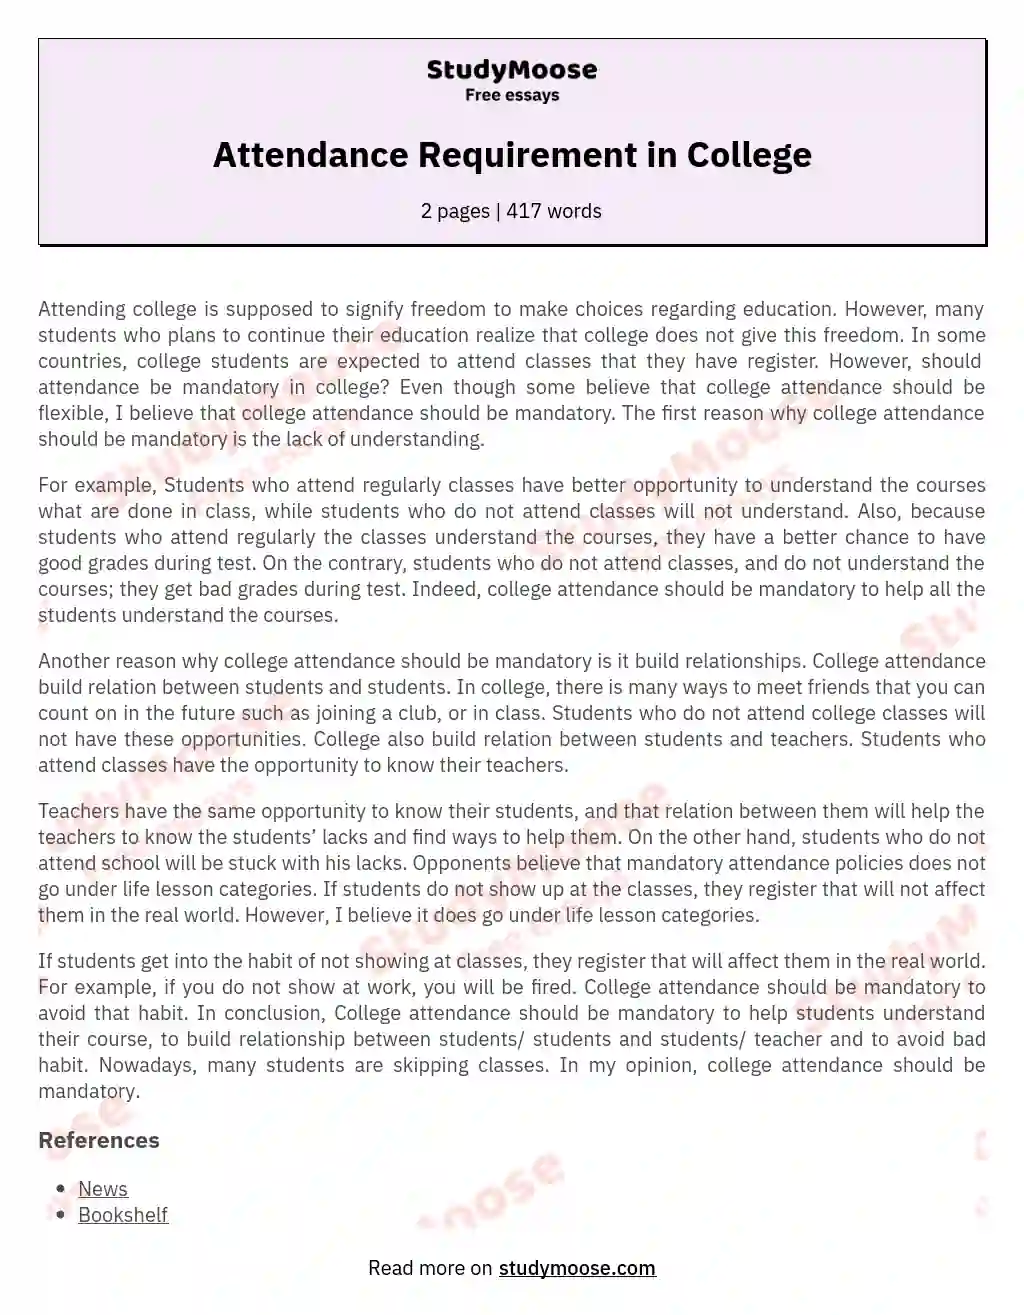 Attendance Requirement in College